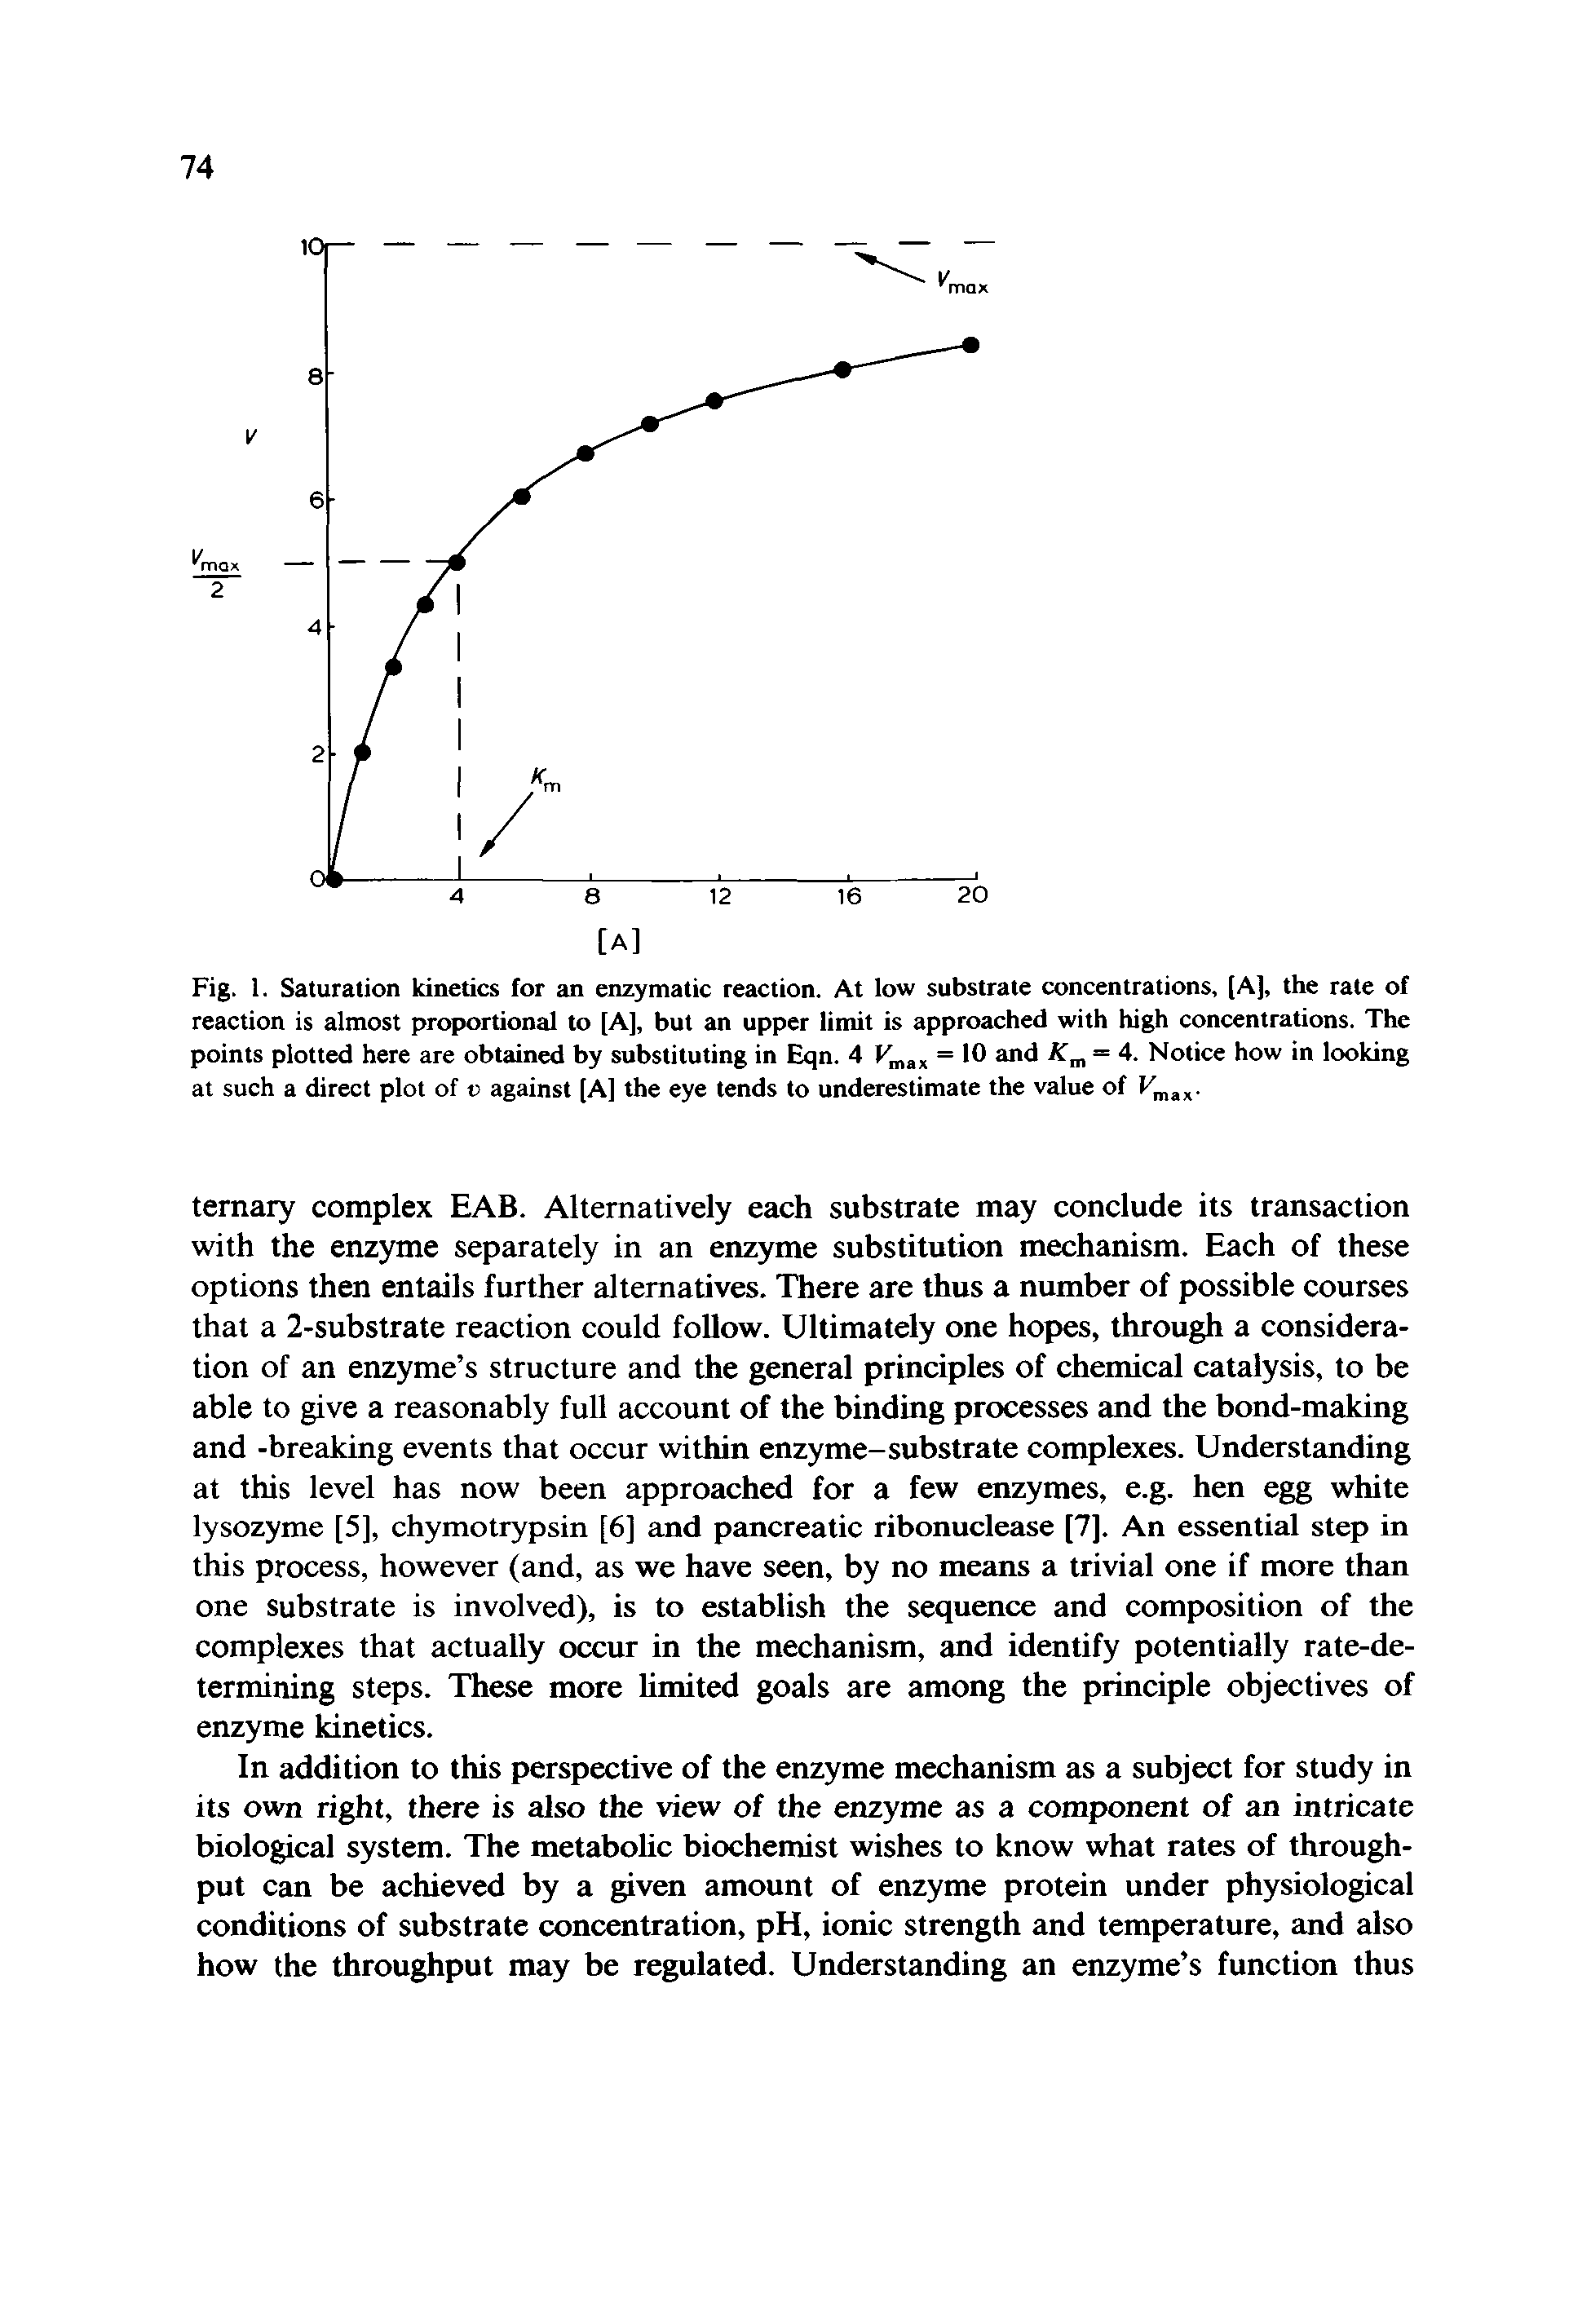 Fig. 1. Saturation kinetics for an enzymatic reaction. At low substrate concentrations, [A], the rate of reaction is almost proportional to [A], but an upper limit is approached with high concentrations. The points plotted here are obtained by substituting in Eqn. 4 K ,a, = 10 and = 4. Notice how in looking at such a direct plot of v against [A] the eye tends to underestimate the value of...